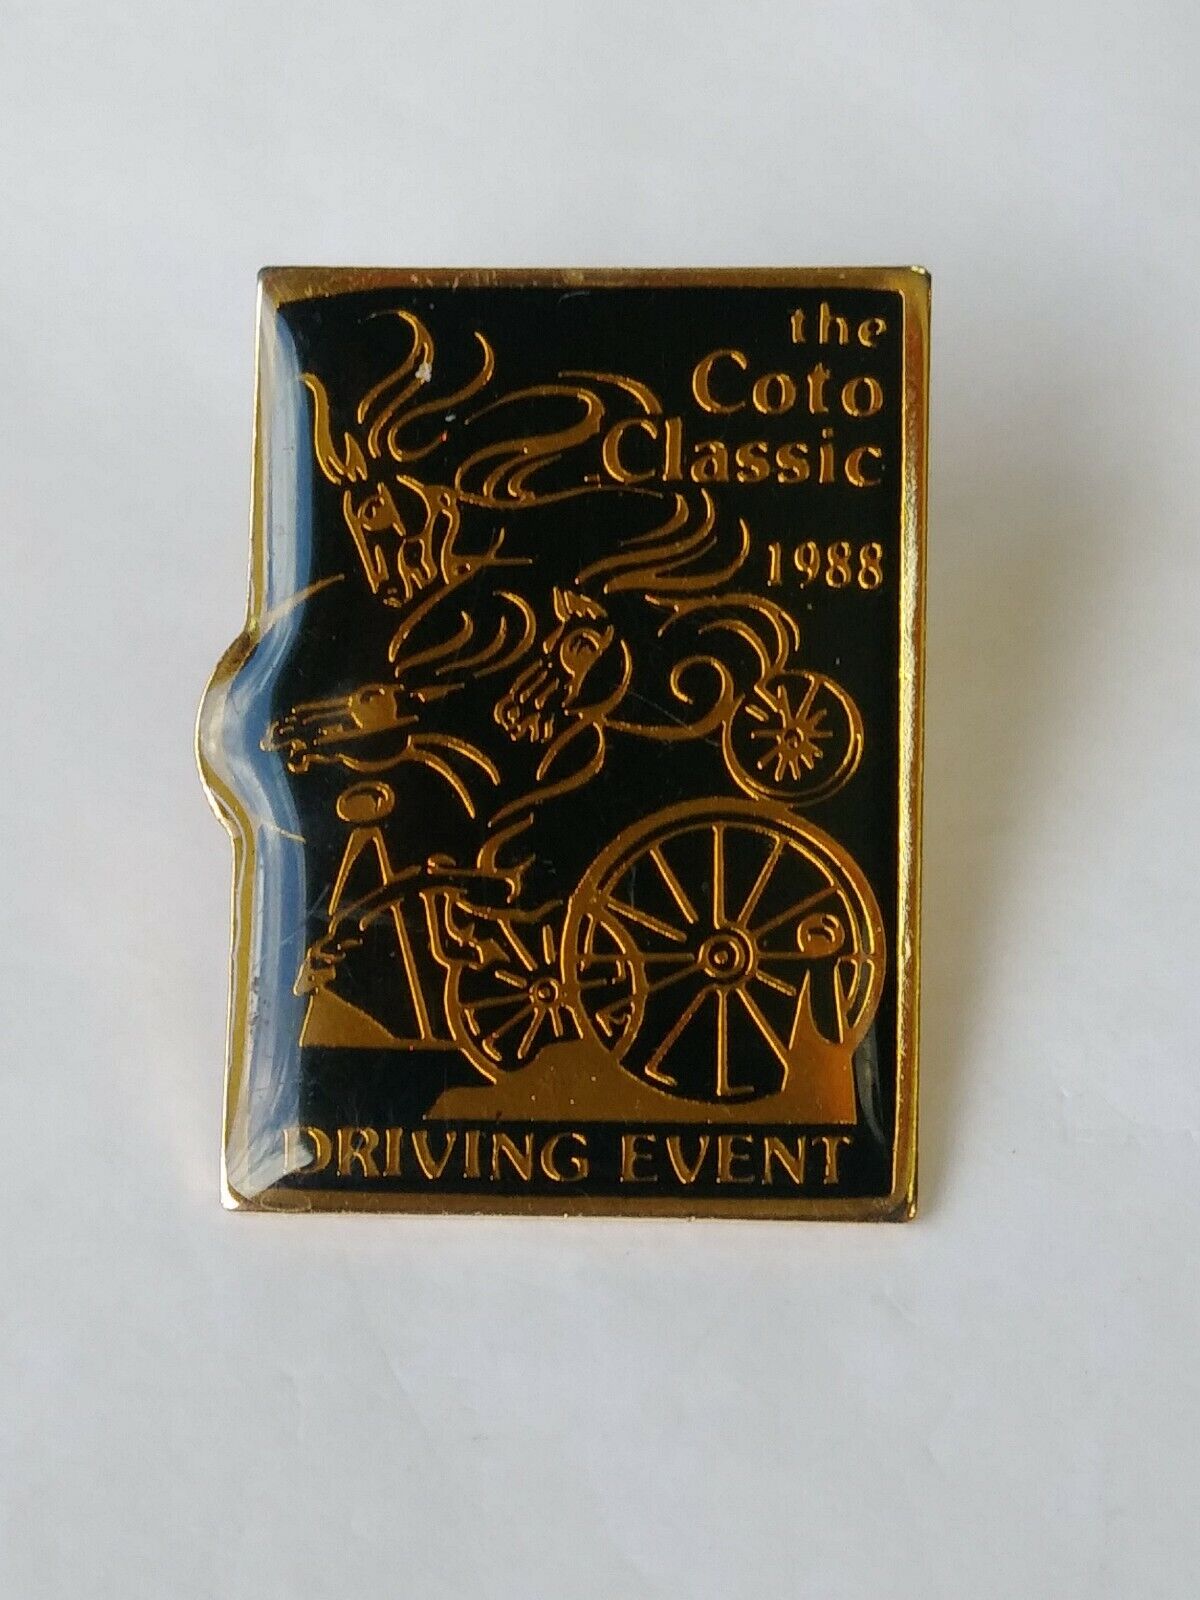 The Coto Classic Driving Event 1988 Lapel Pin Equestrian Carriage Race Vintage